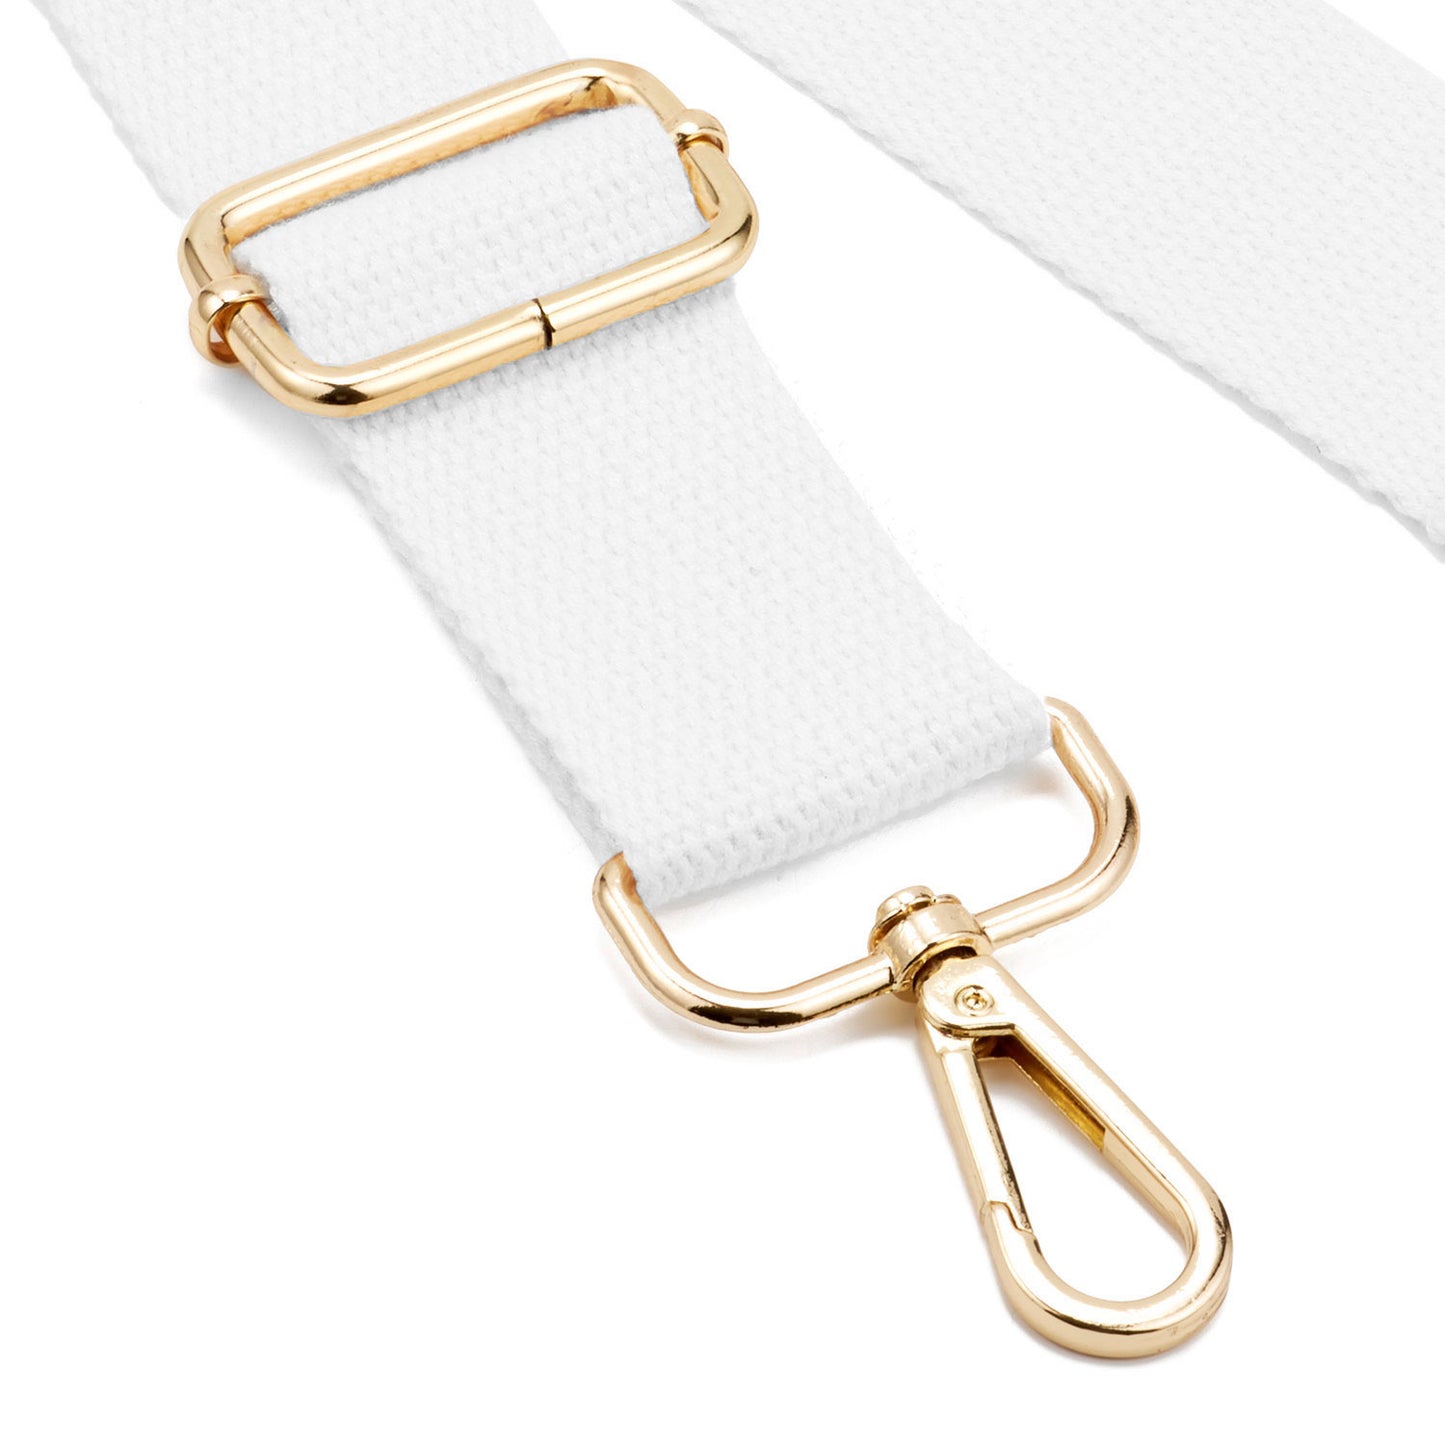  TANOSII Wide Purse Strap Adjustable Replacement Shoulder  Crossbody Strap Handbag Strap All White-1: Clothing, Shoes & Jewelry